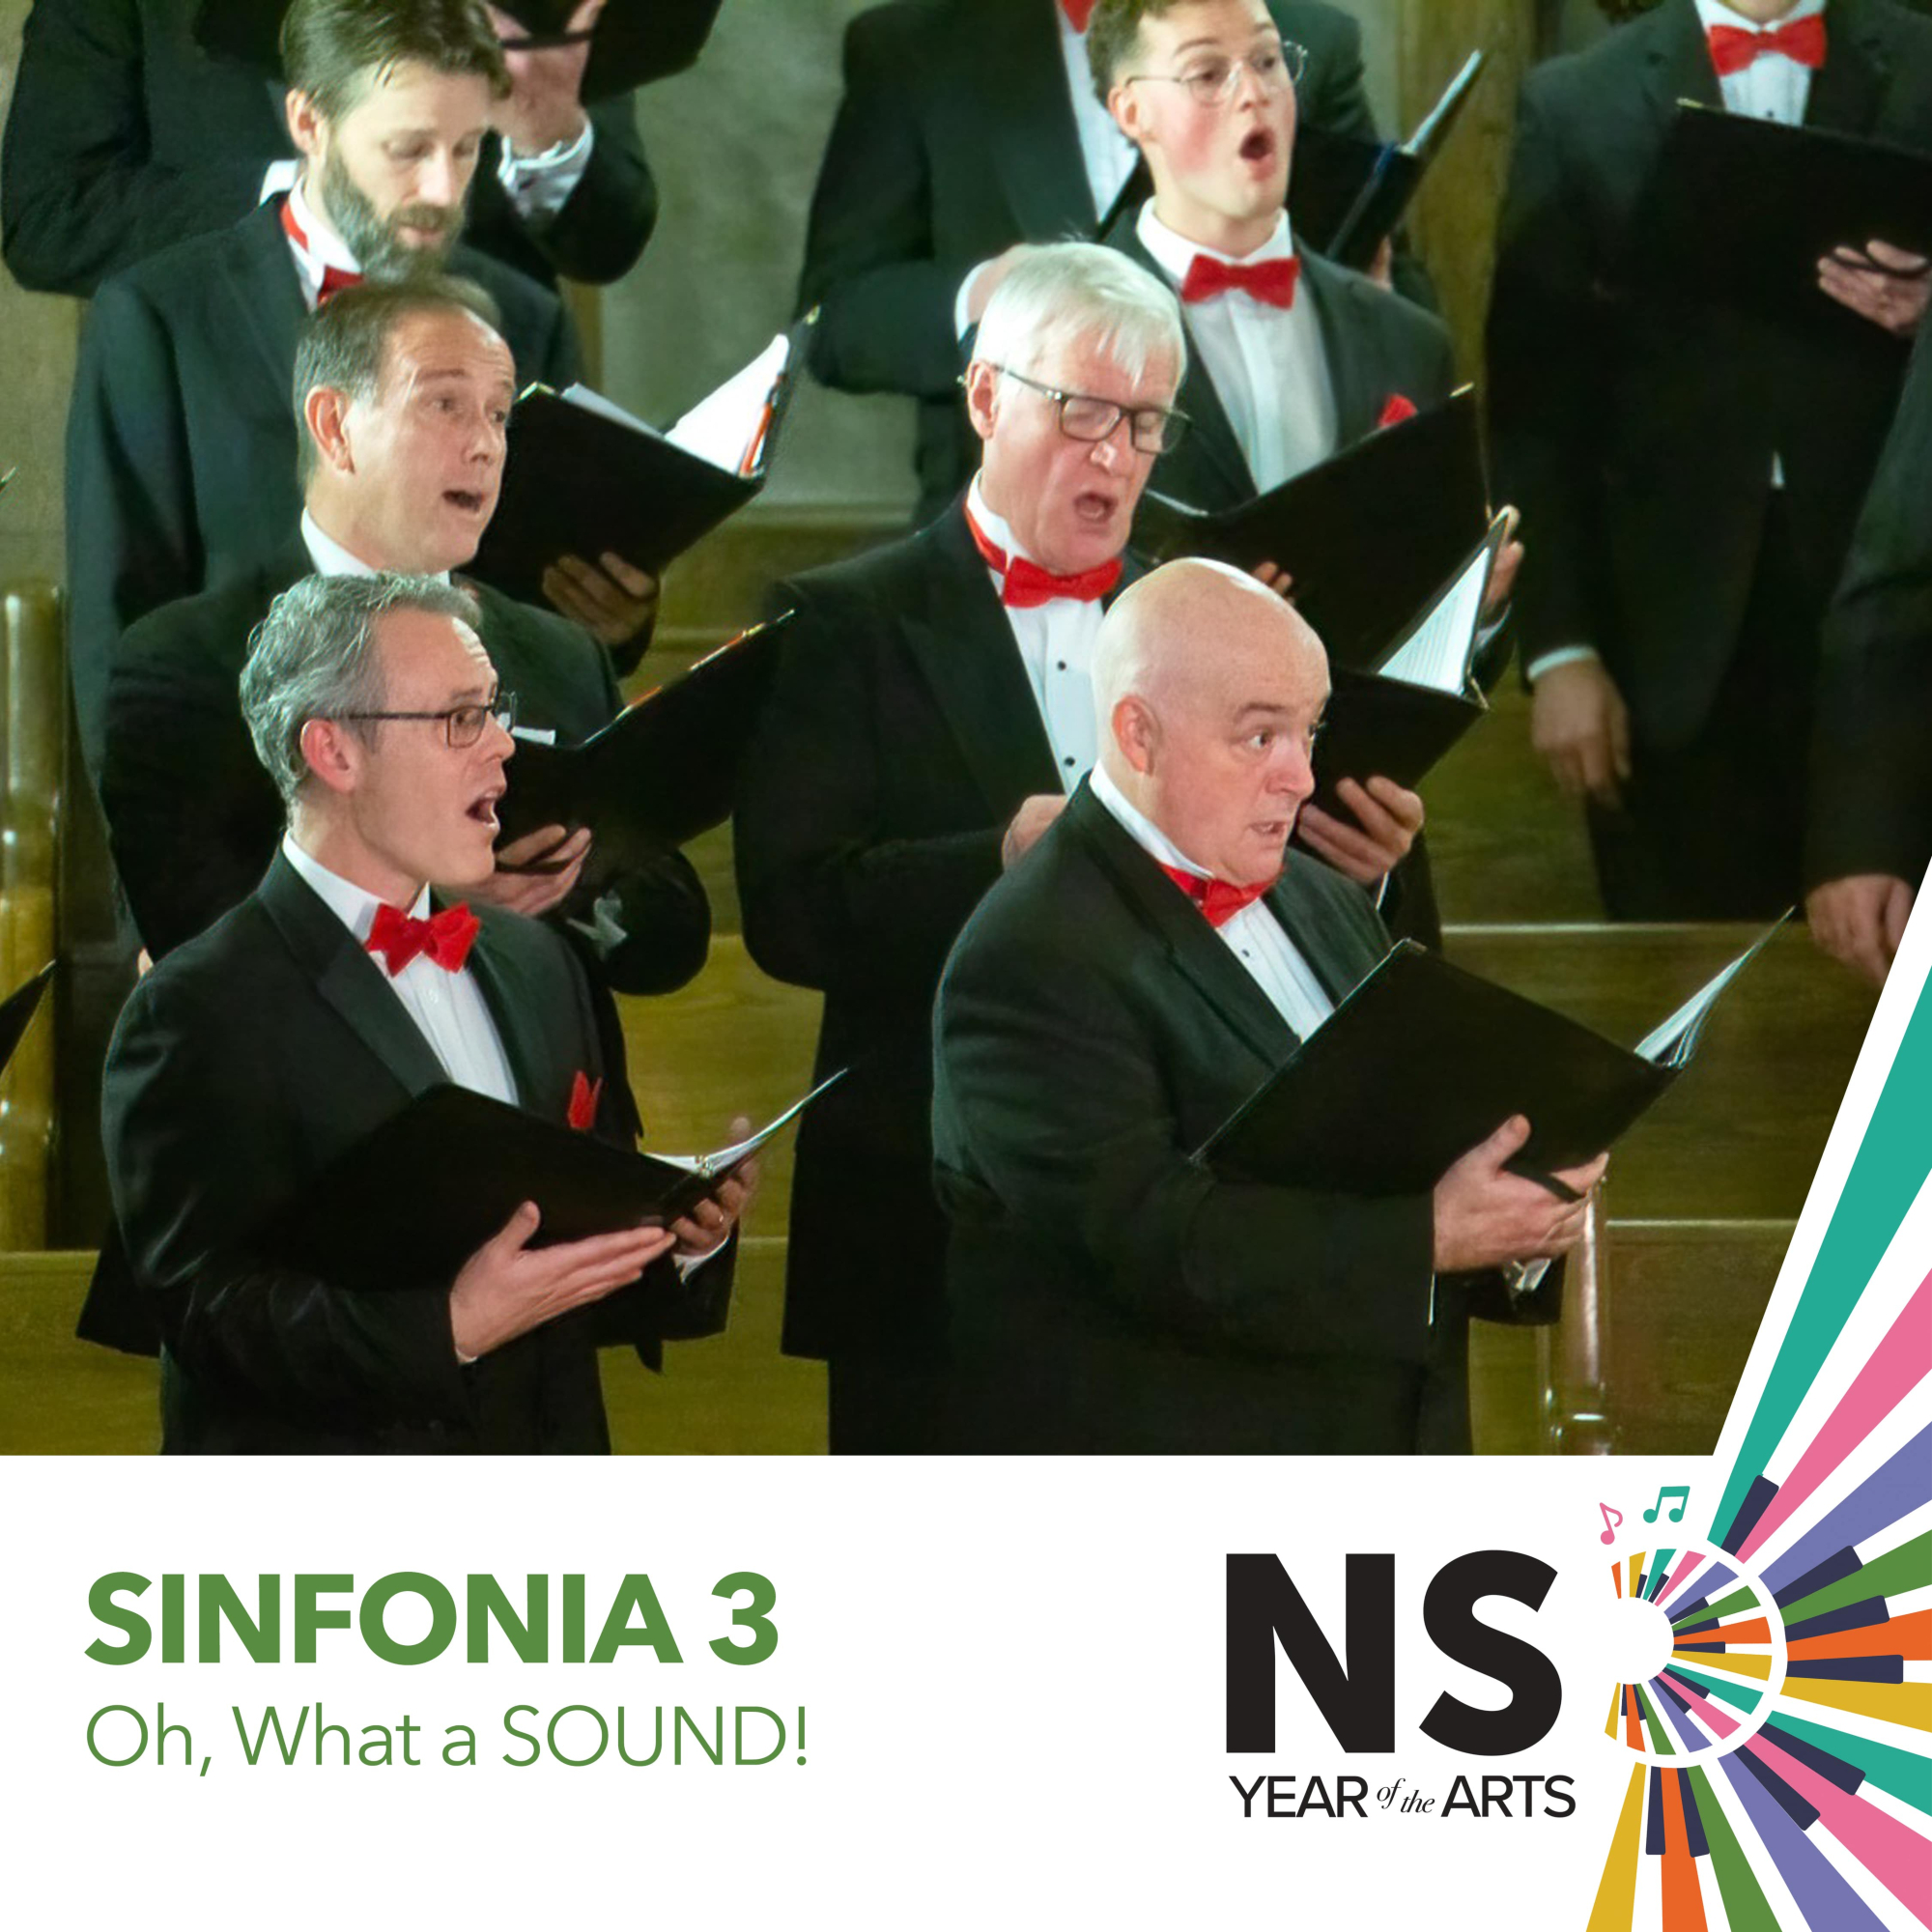 Sinfonia 3 – Oh, What a SOUND!